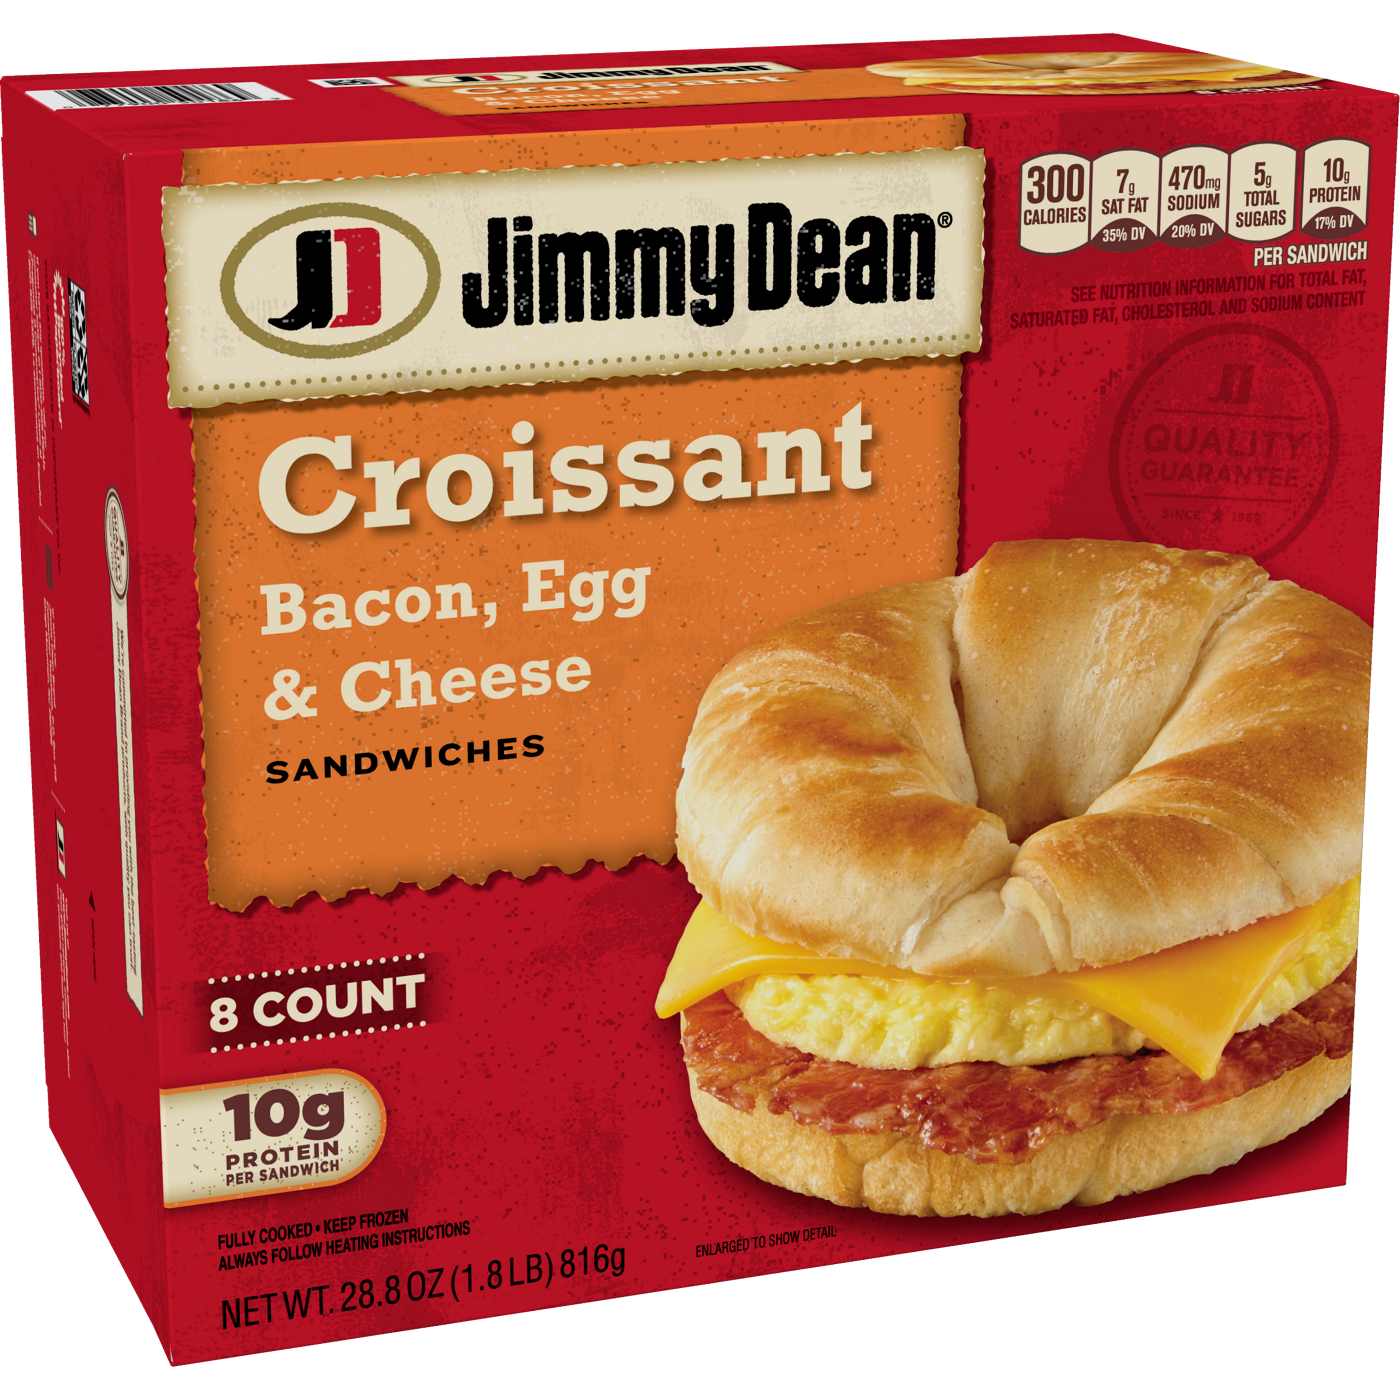 Jimmy Dean Bacon, Egg & Cheese Croissant Sandwiches; image 5 of 6